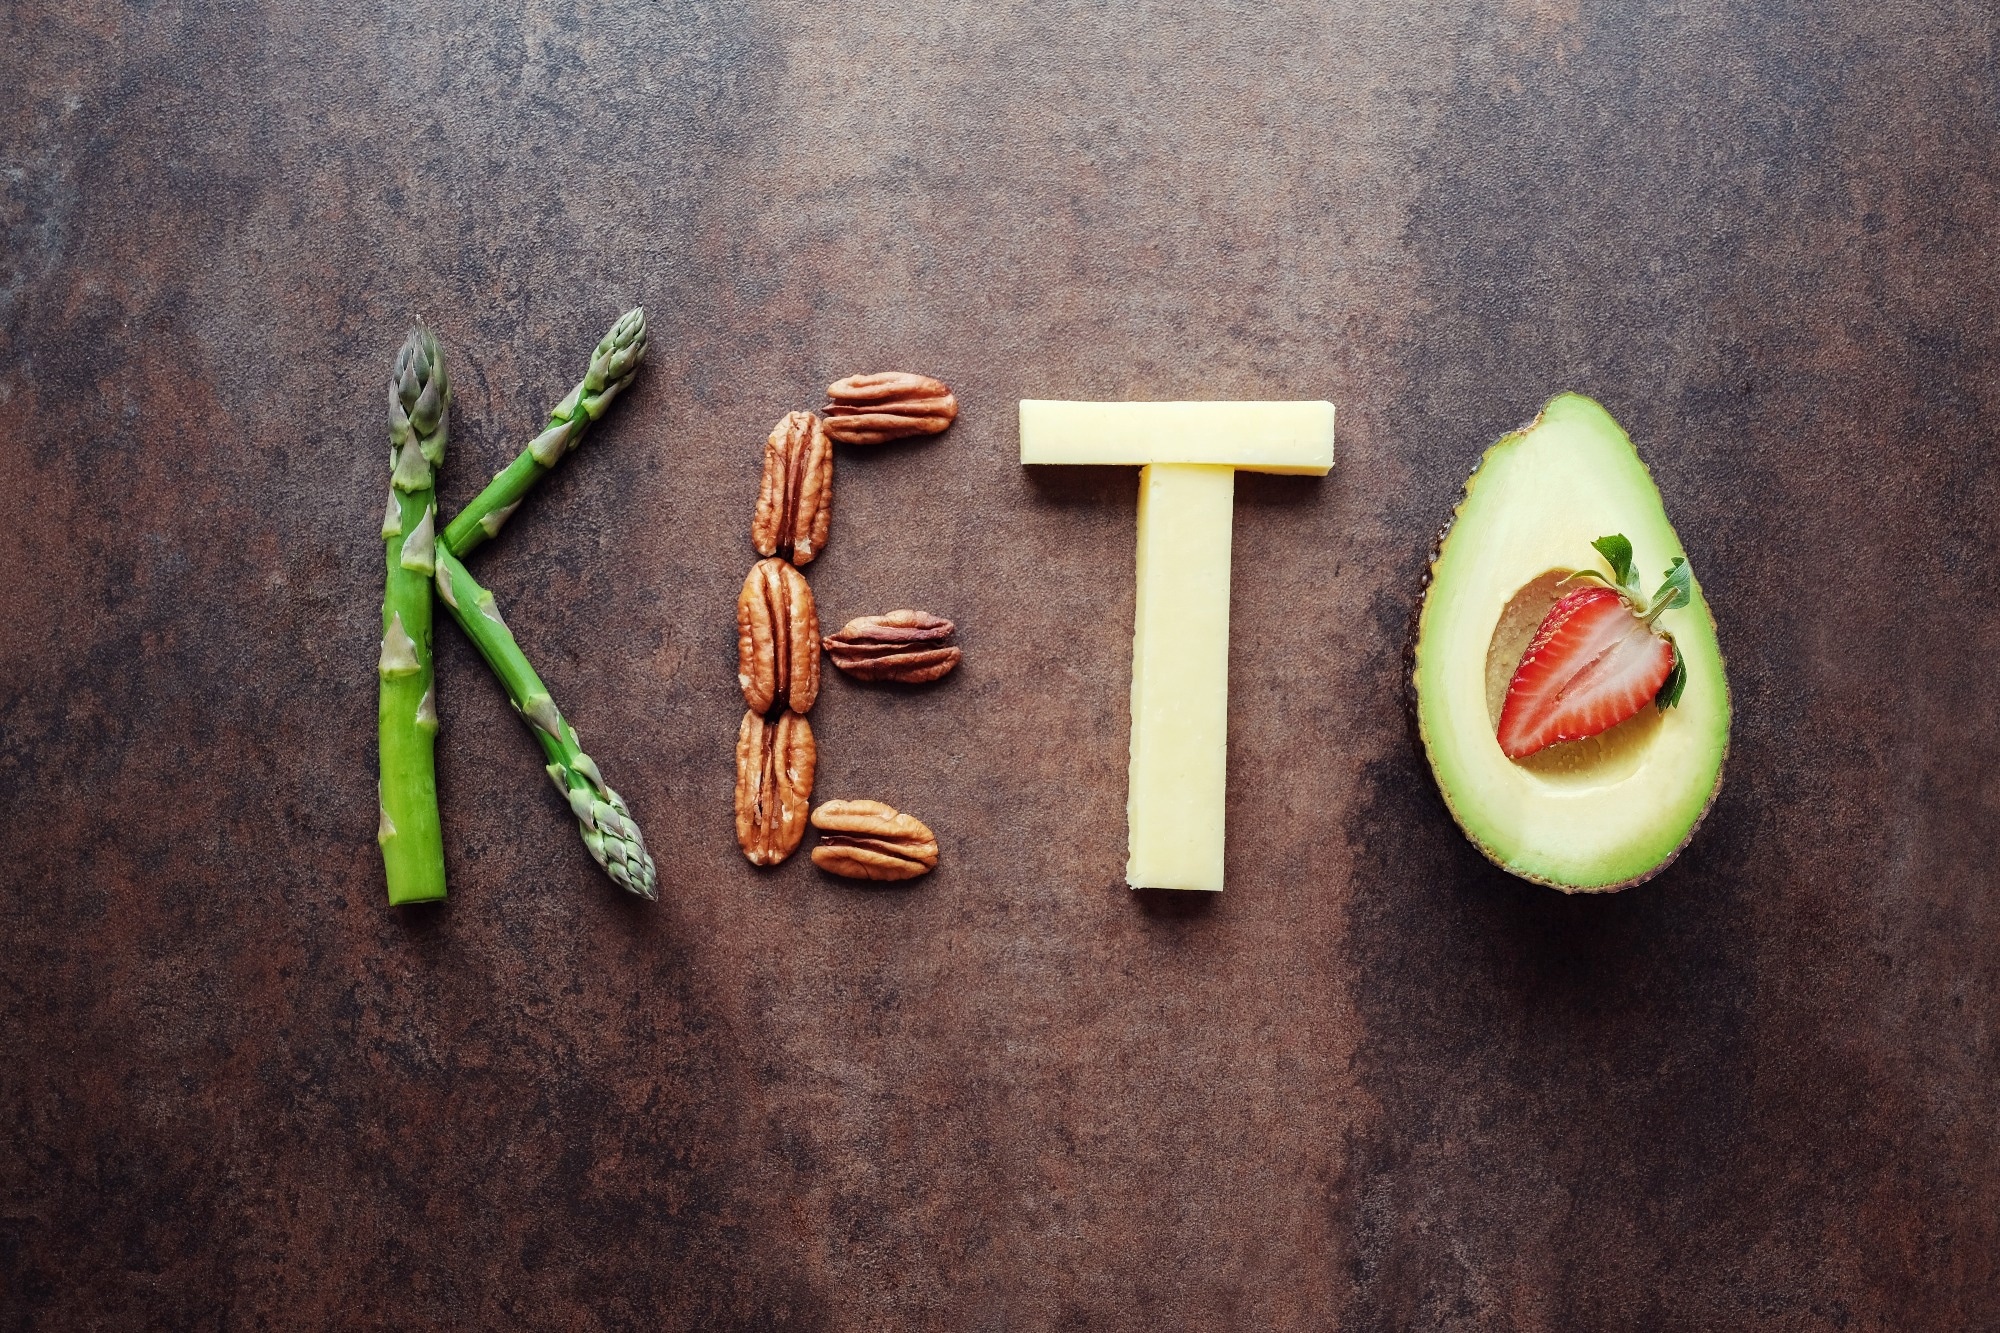 Study: The Effect of Three Different Ketogenic Diet Protocols on Migraine and Fatigue in Chronic and High-Frequency Episodic Migraine: A Pilot Study. Image Credit: SewCreamStudio / Shutterstock